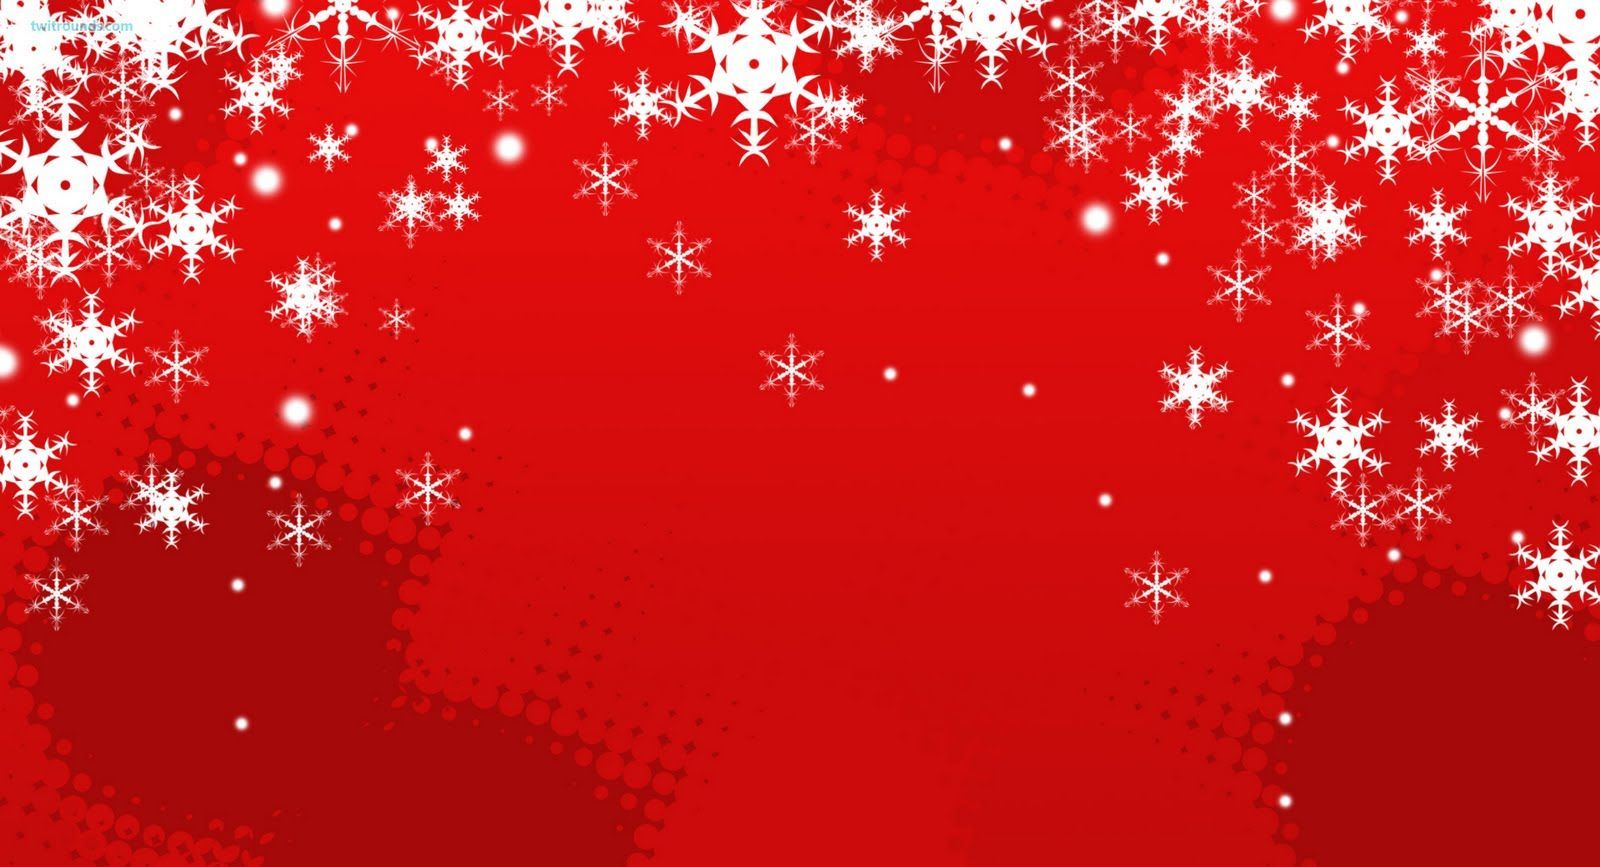 Red Snowflake Clip Art. Happy Holidays Christmas white snowflakes desktop red background X mas. Christmas wallpaper, Red christmas background, Holiday background